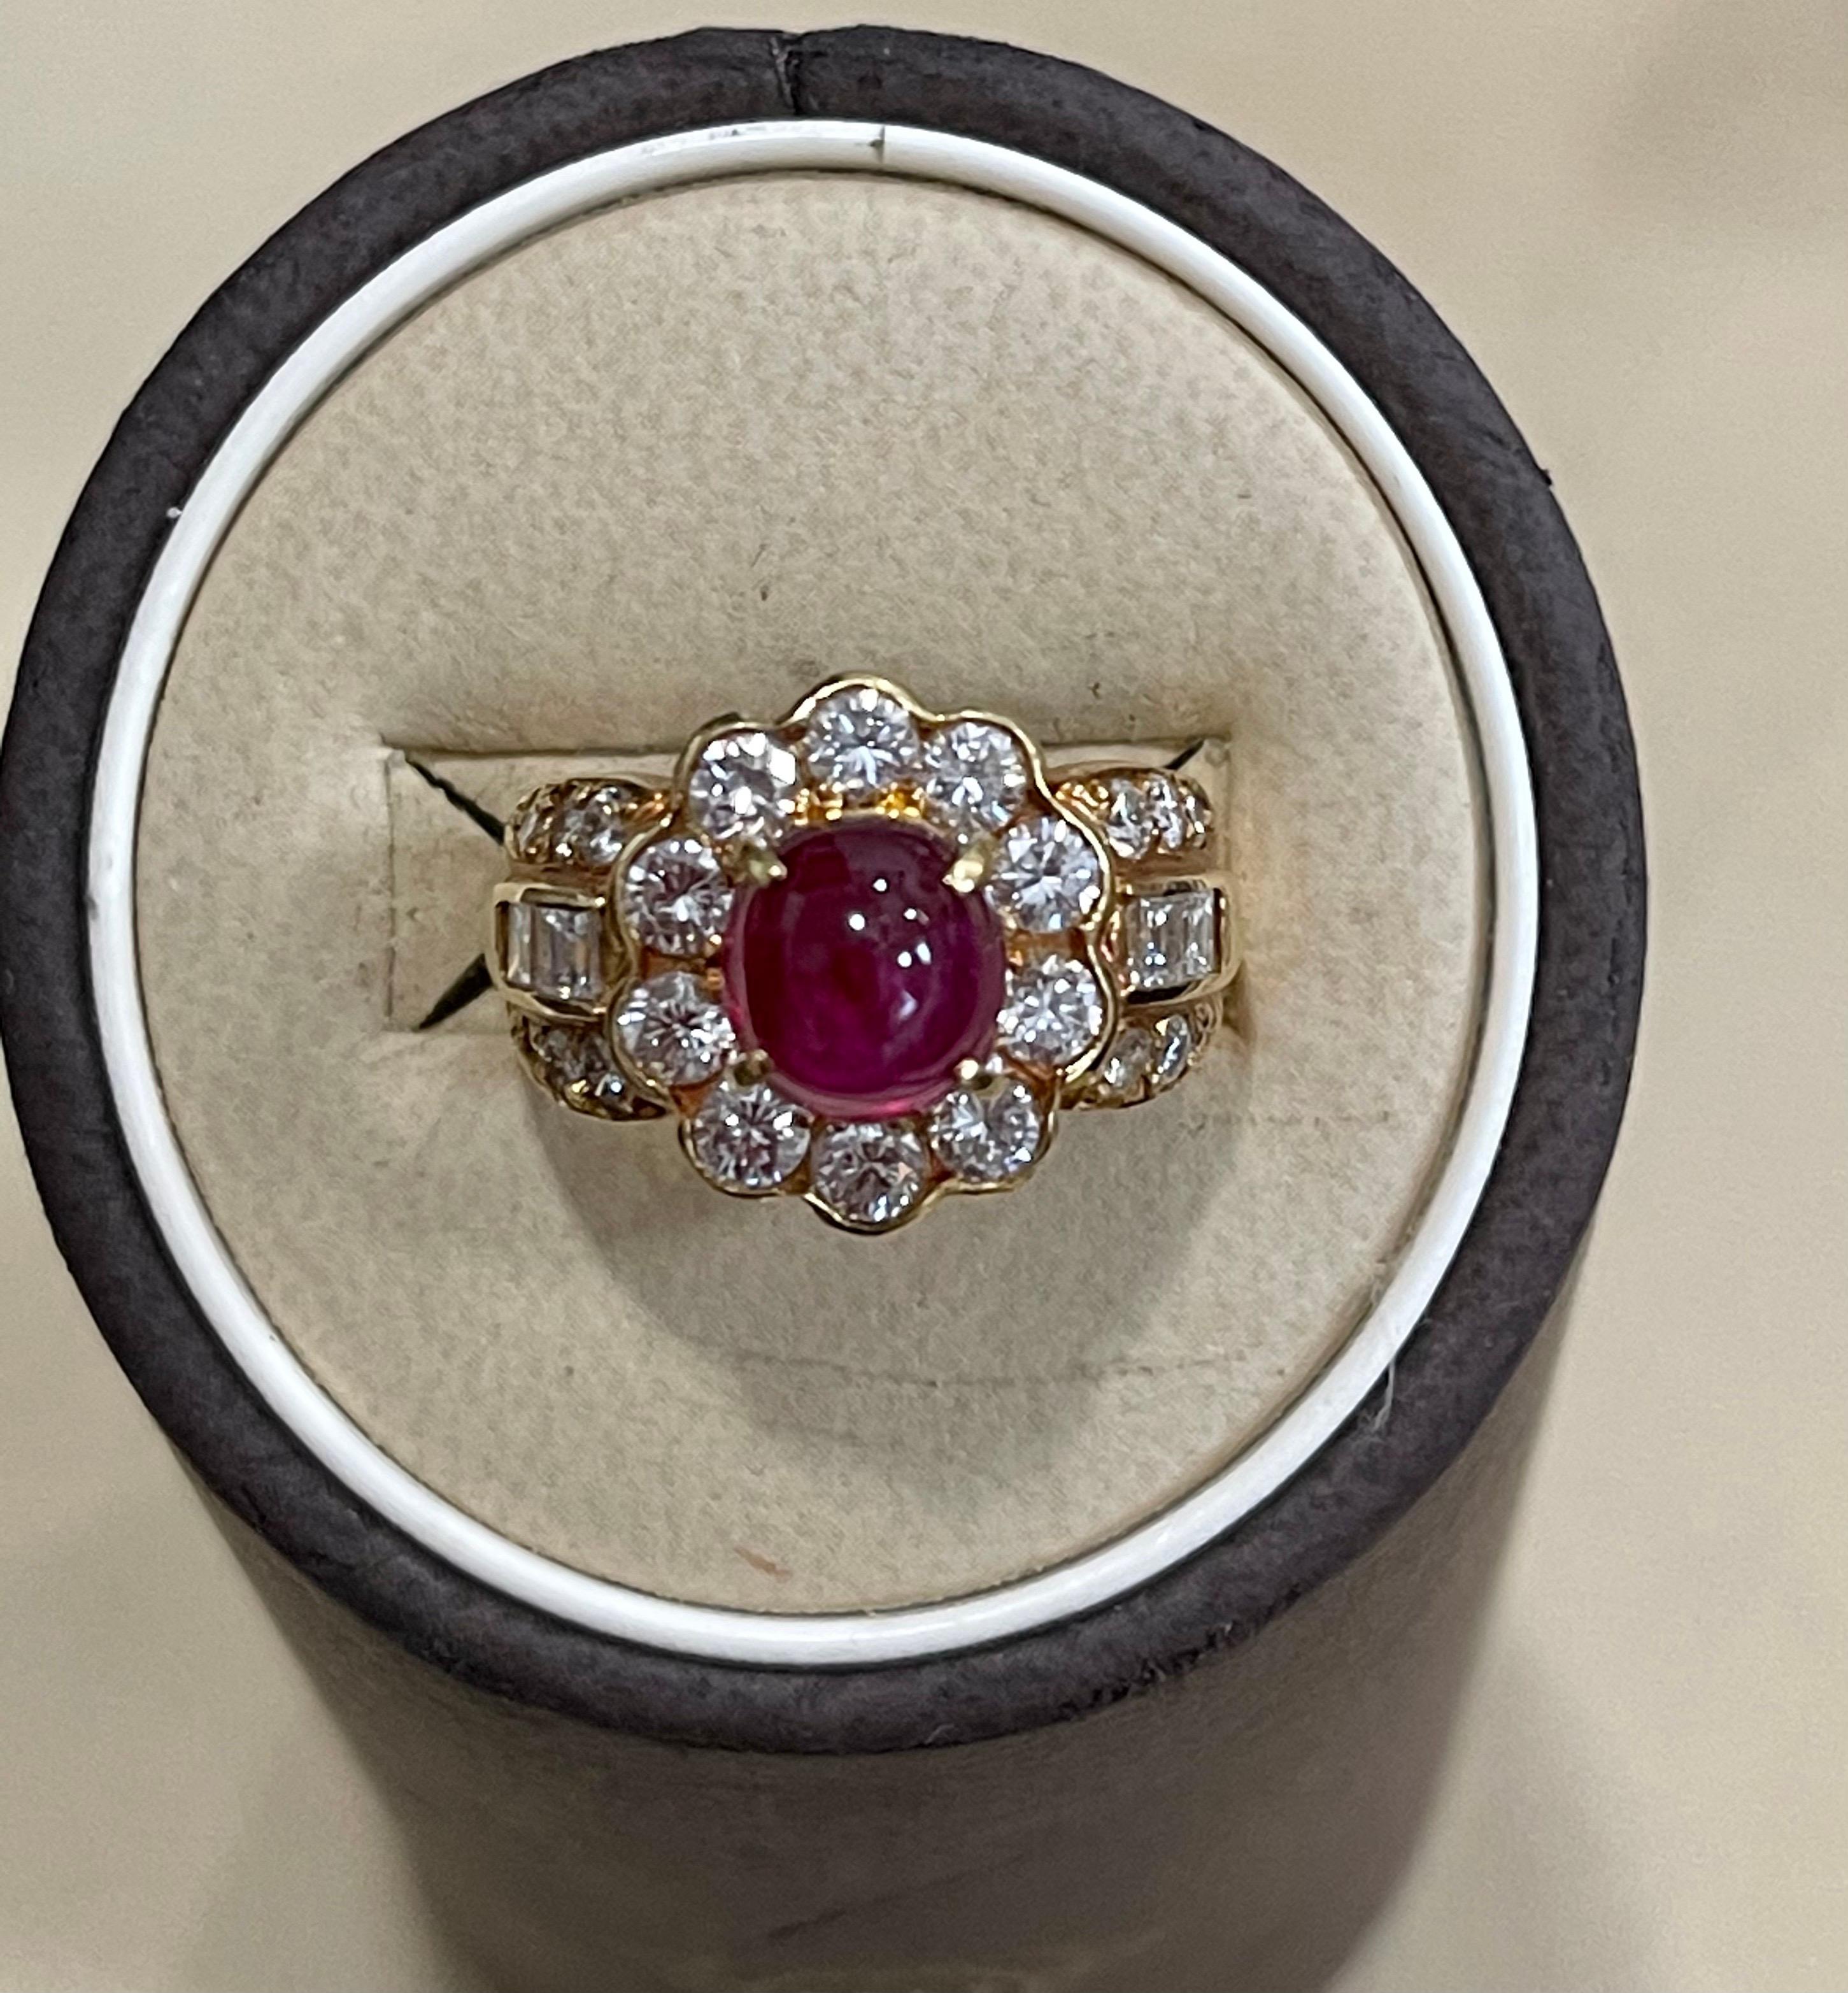 3.15 Carat Natural Burma Cabochon Ruby and 1.79 Carat Diamond 18 Karat Gold Ring In Excellent Condition For Sale In New York, NY